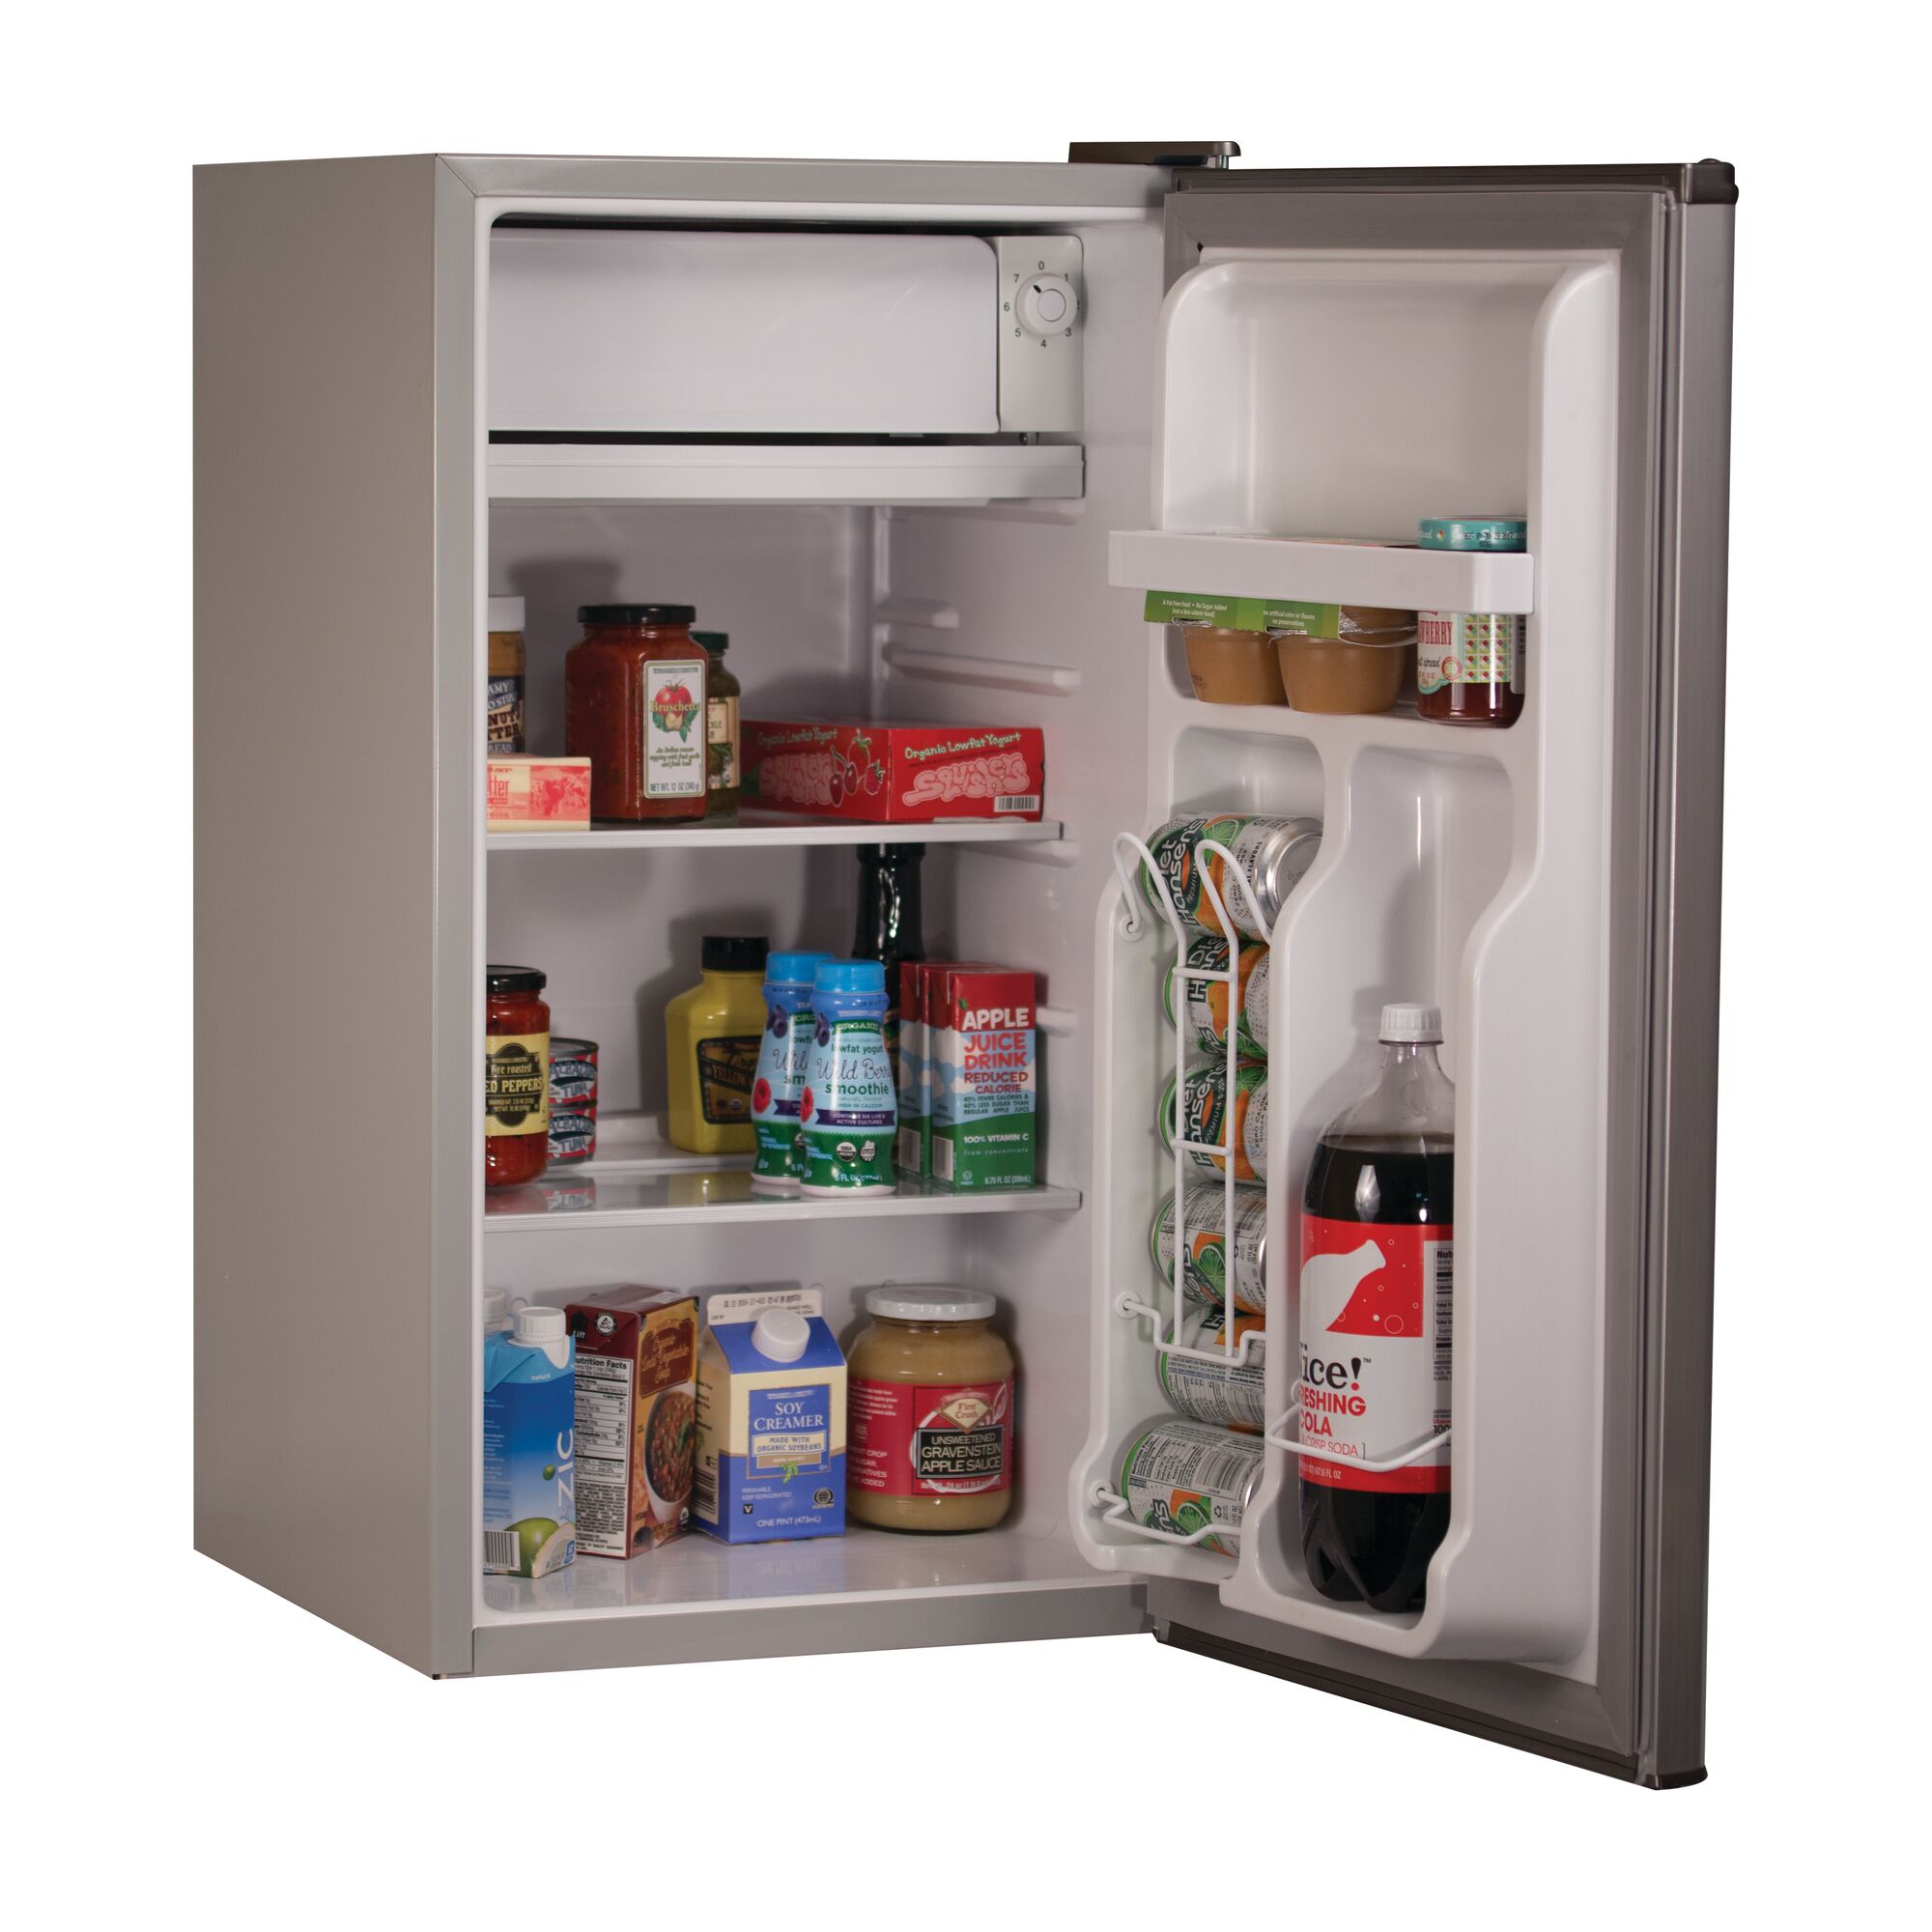 Profile of open 3.2 Cubic feet energy star refrigerator with freezer.